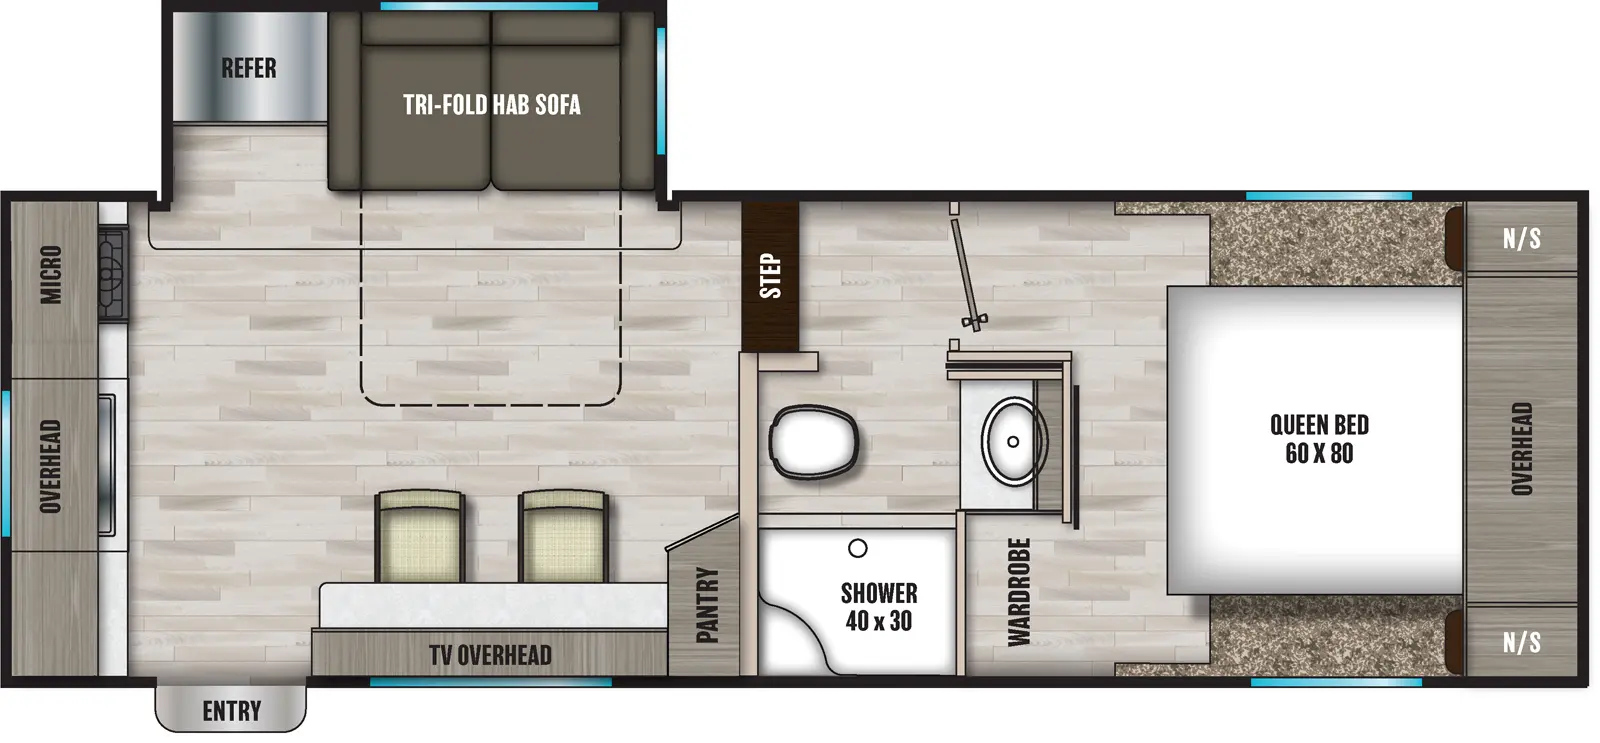 The 235RK has one slideout and one entry. Interior layout front to back: foot facing queen bed with overhead cabinet, nightstands on both sides, and a door side wardrobe at the foot of the bed; door side full bathroom; two steps down to main living area; off-door side slideout with tri-fold hide-a-bed sofa and refrigerator; door side pantry, countertop with seating, and TV overhead; rear kitchen countertop with sink, cooktop, overhead cabinet and microwave.